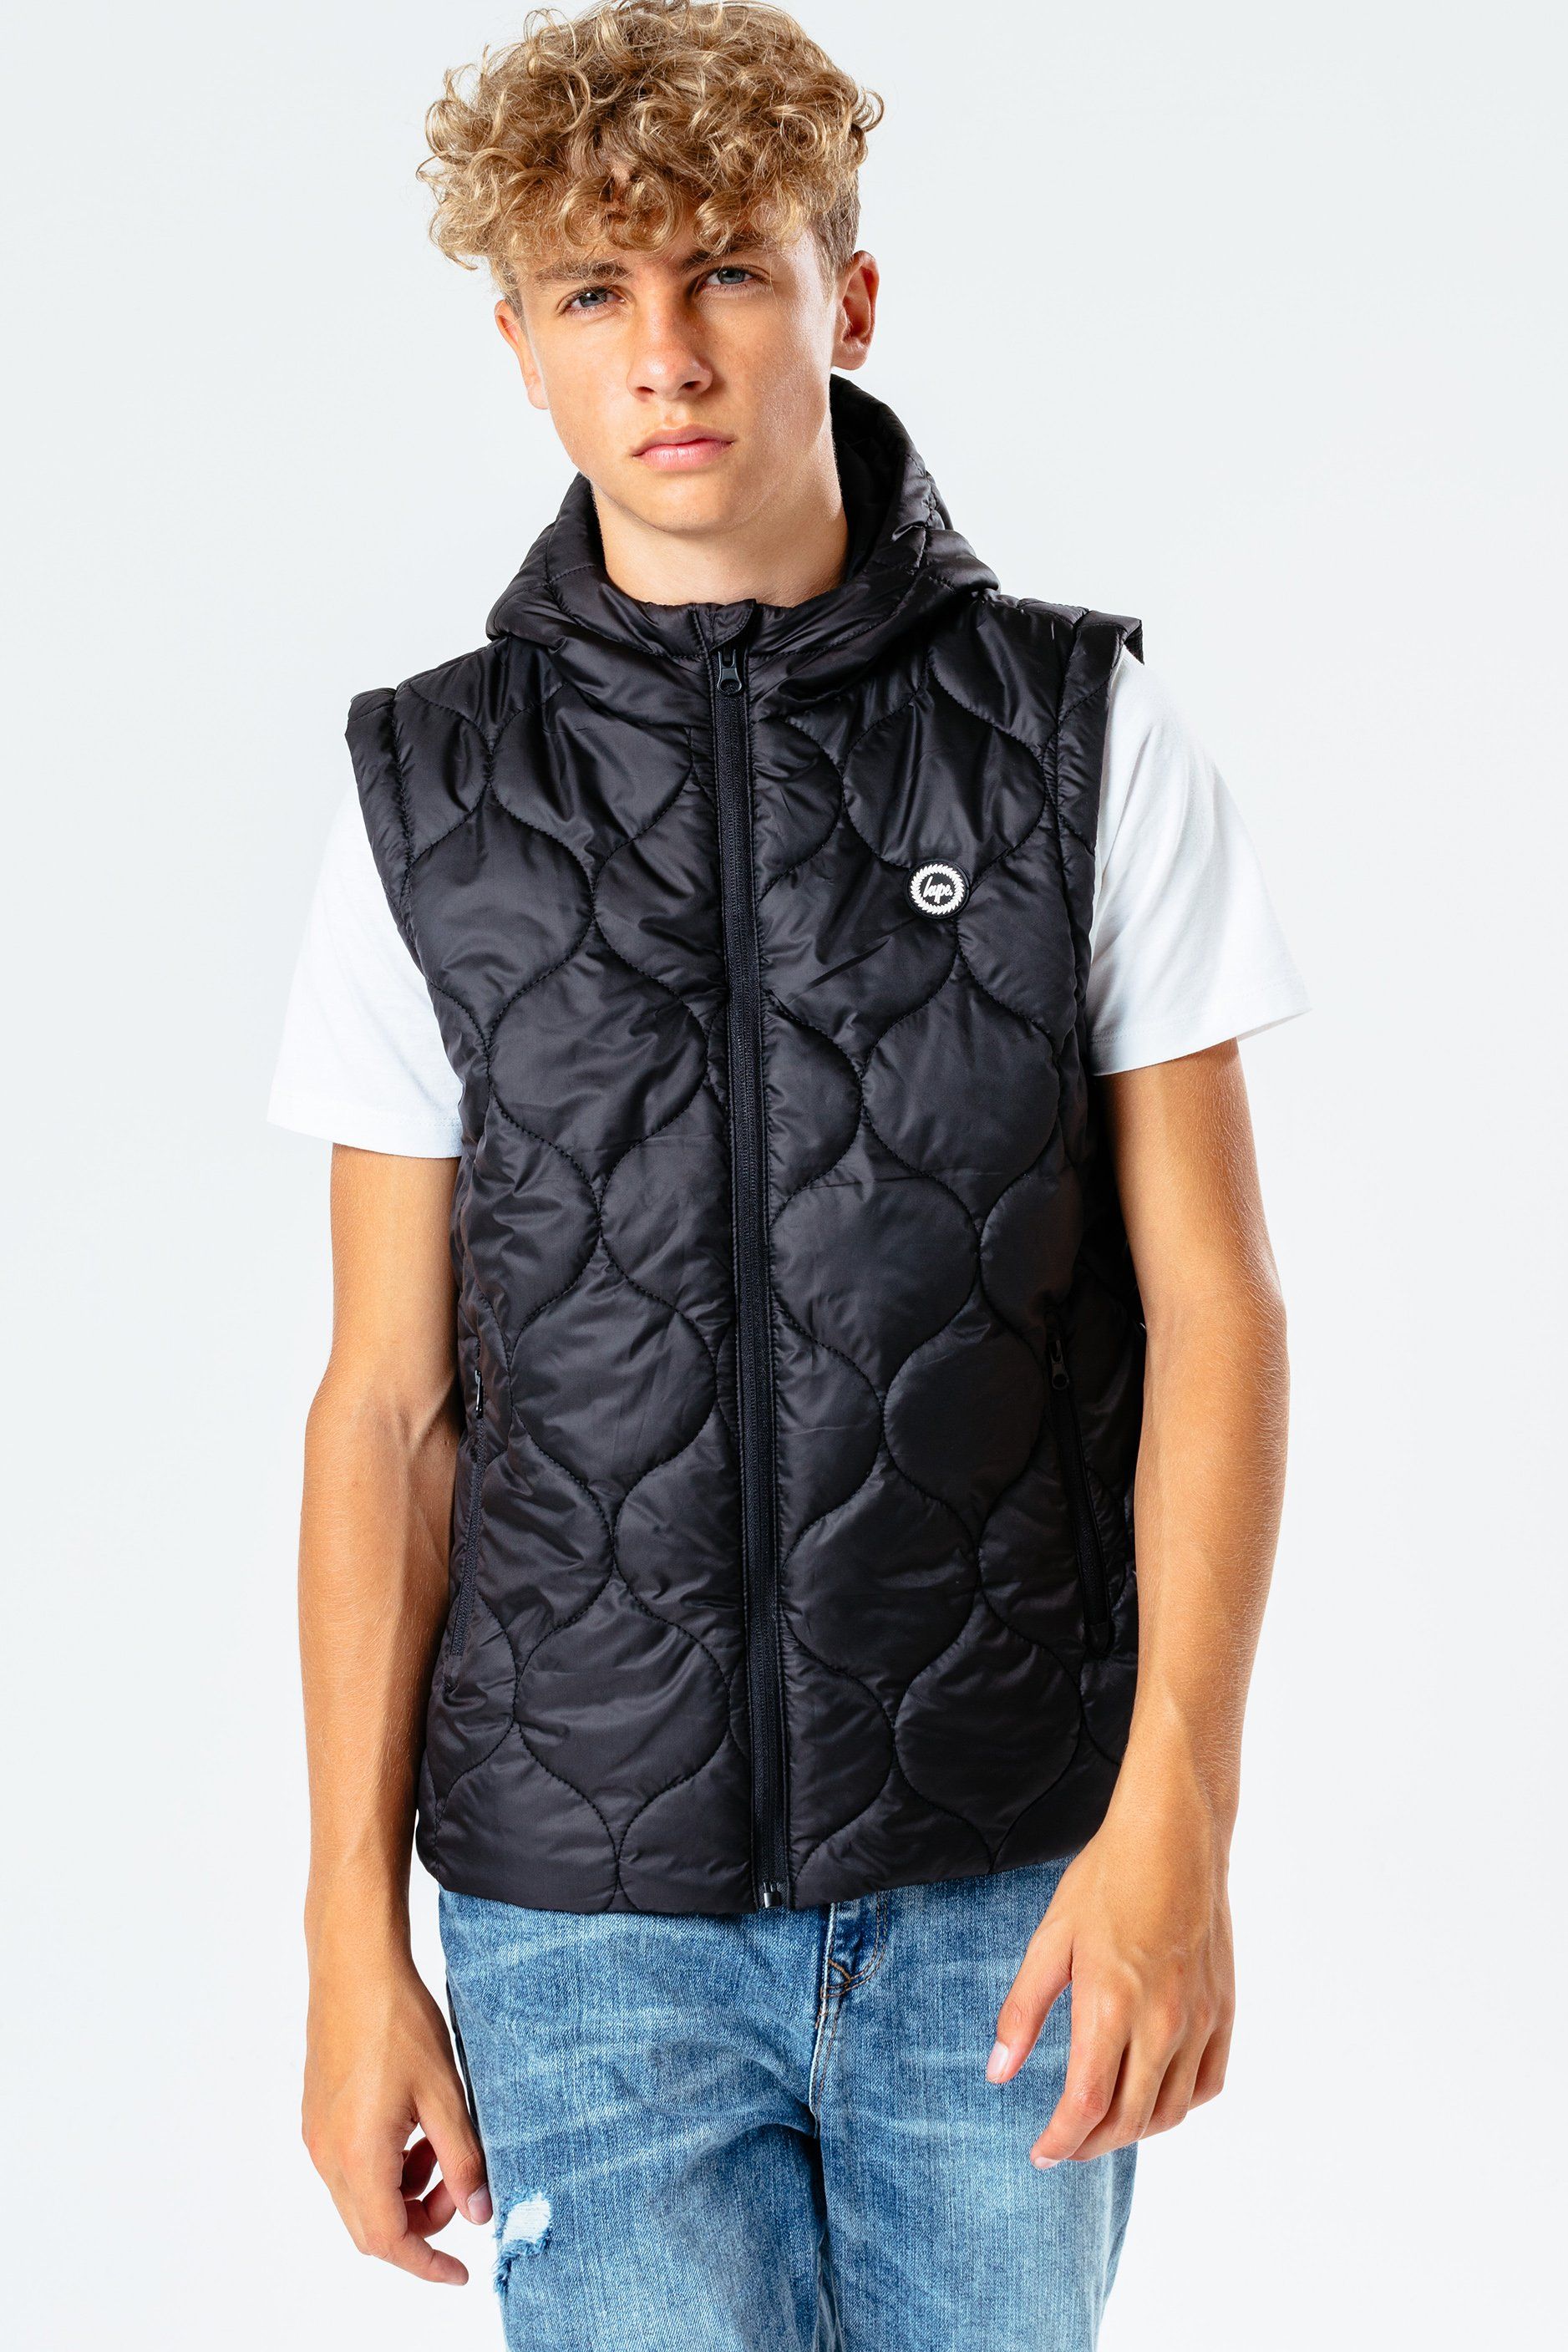 The HYPE. black gilet, the perfect in-between when your mum says you need to wear a jacket. With an 's' quilt detail in the upmost comfort fabric. Perfect to wear with a white long-sleeved t-shirt and denim jeans. Machine wash at 30 degrees.